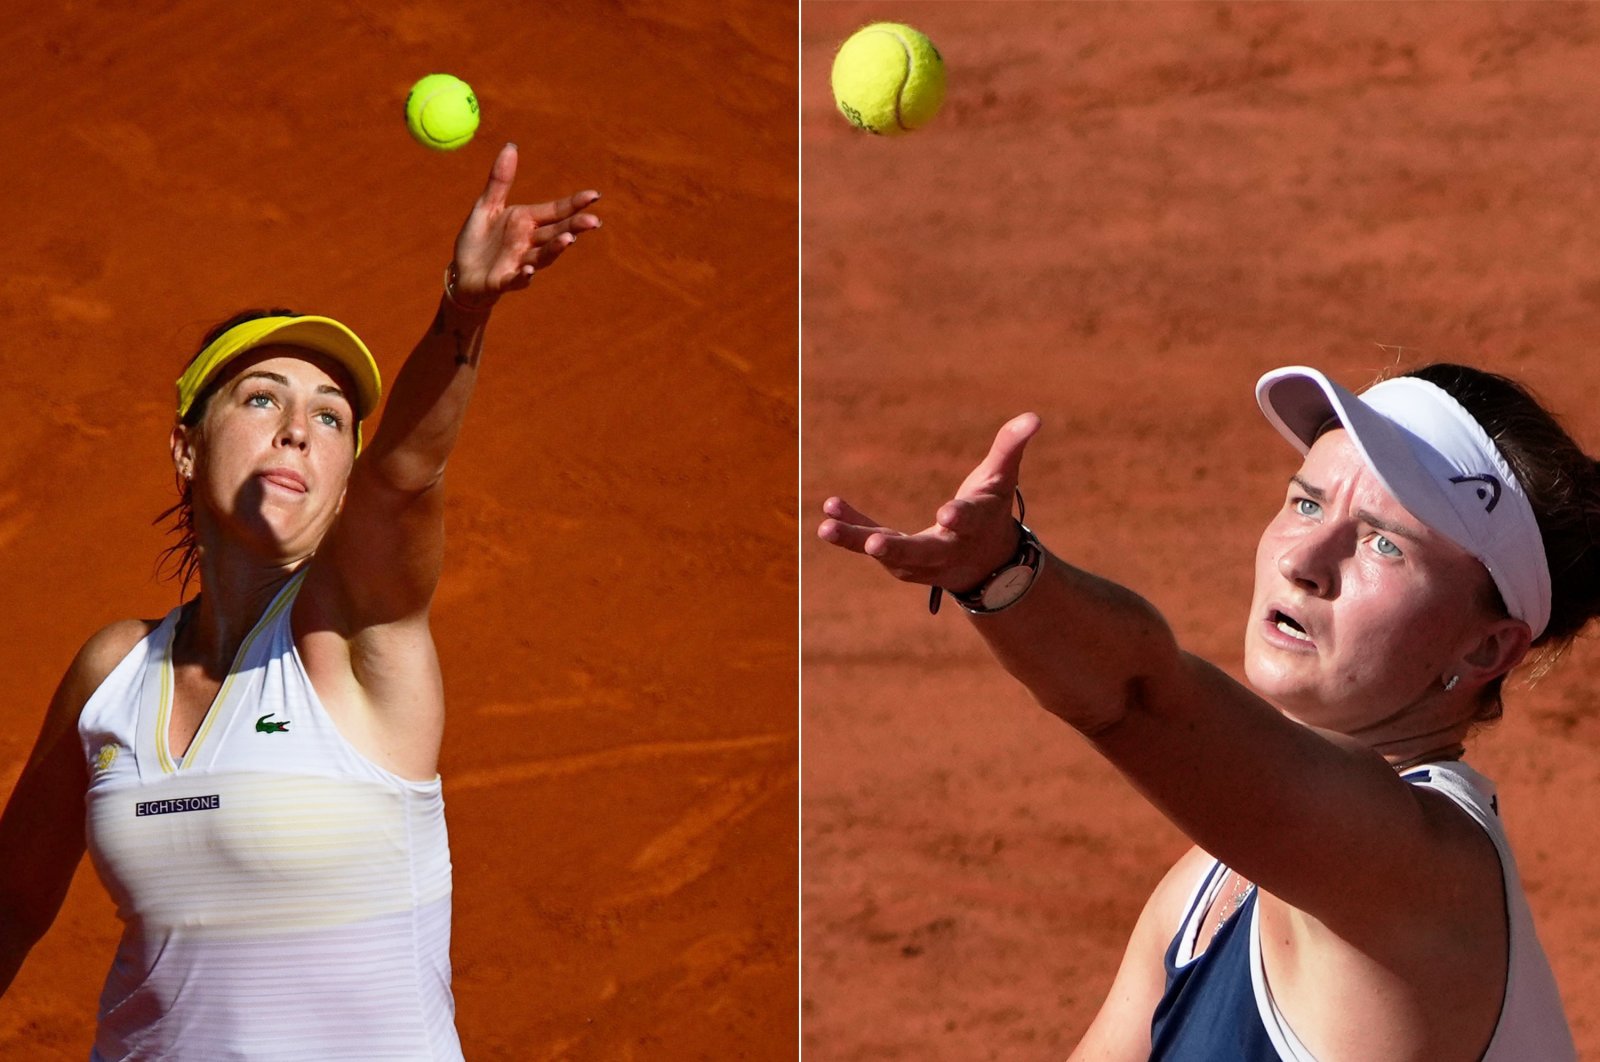 This combination of pictures shows Russia's Anastasia Pavlyuchenkova (L) and Czech Republic's Barbora Krejcikova during their women's singles French Open semifinal matches, Paris, France, June 10, 2021. (AFP Photo)